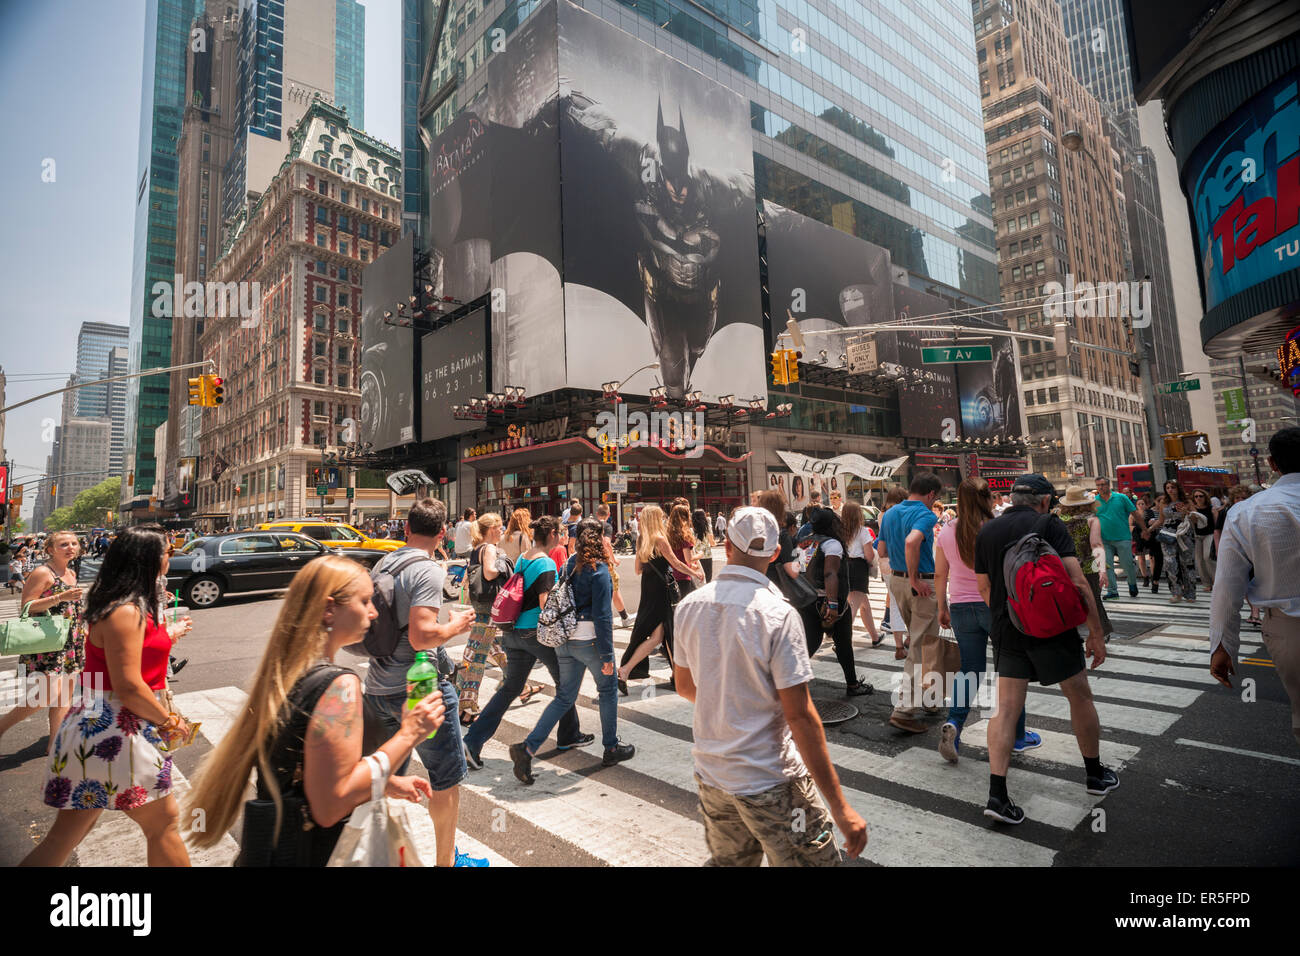 Passerby walk past advertising for RocksteadyStudio's new videogame, 'Batman: Arkham Knight ' on a billboard in Times Square in New York on Wednesday, May 27, 2015. The game, the third part of the 'Arkham' trilogy will be available on June 23. (© Richard B. Levine) Stock Photo